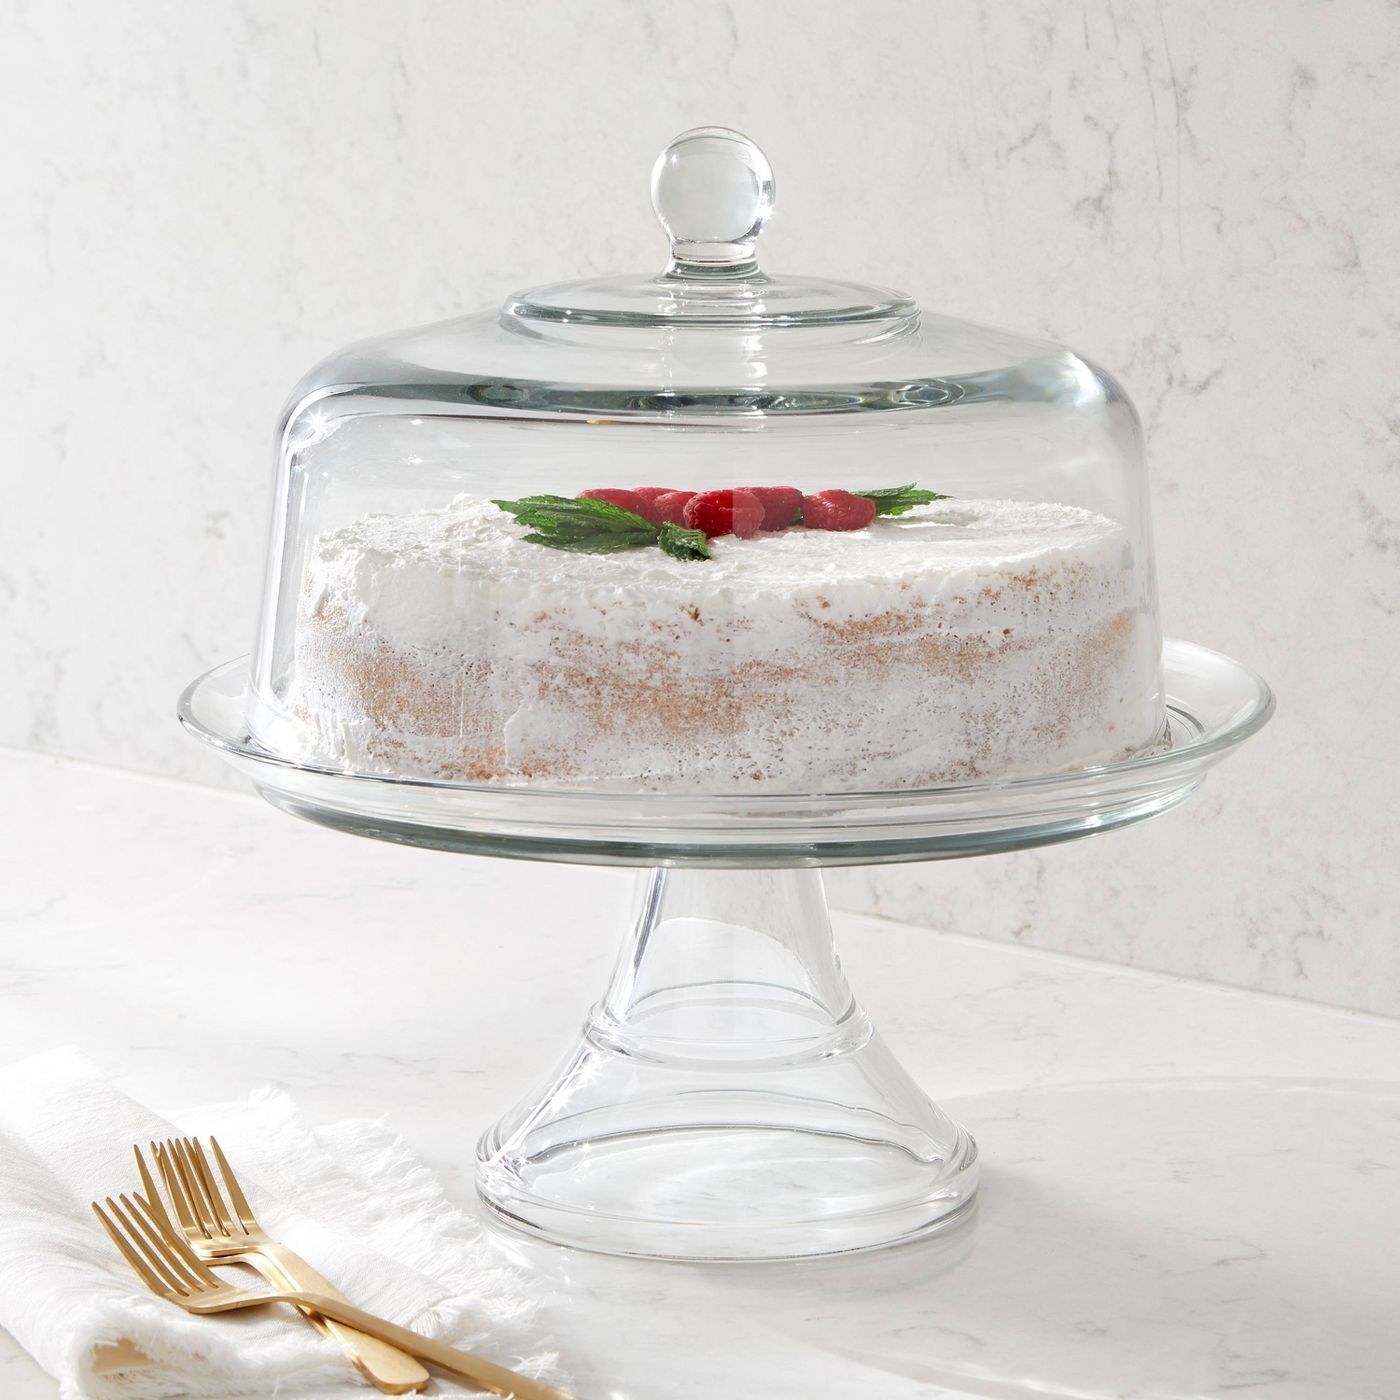 glass cake stand with cake inside